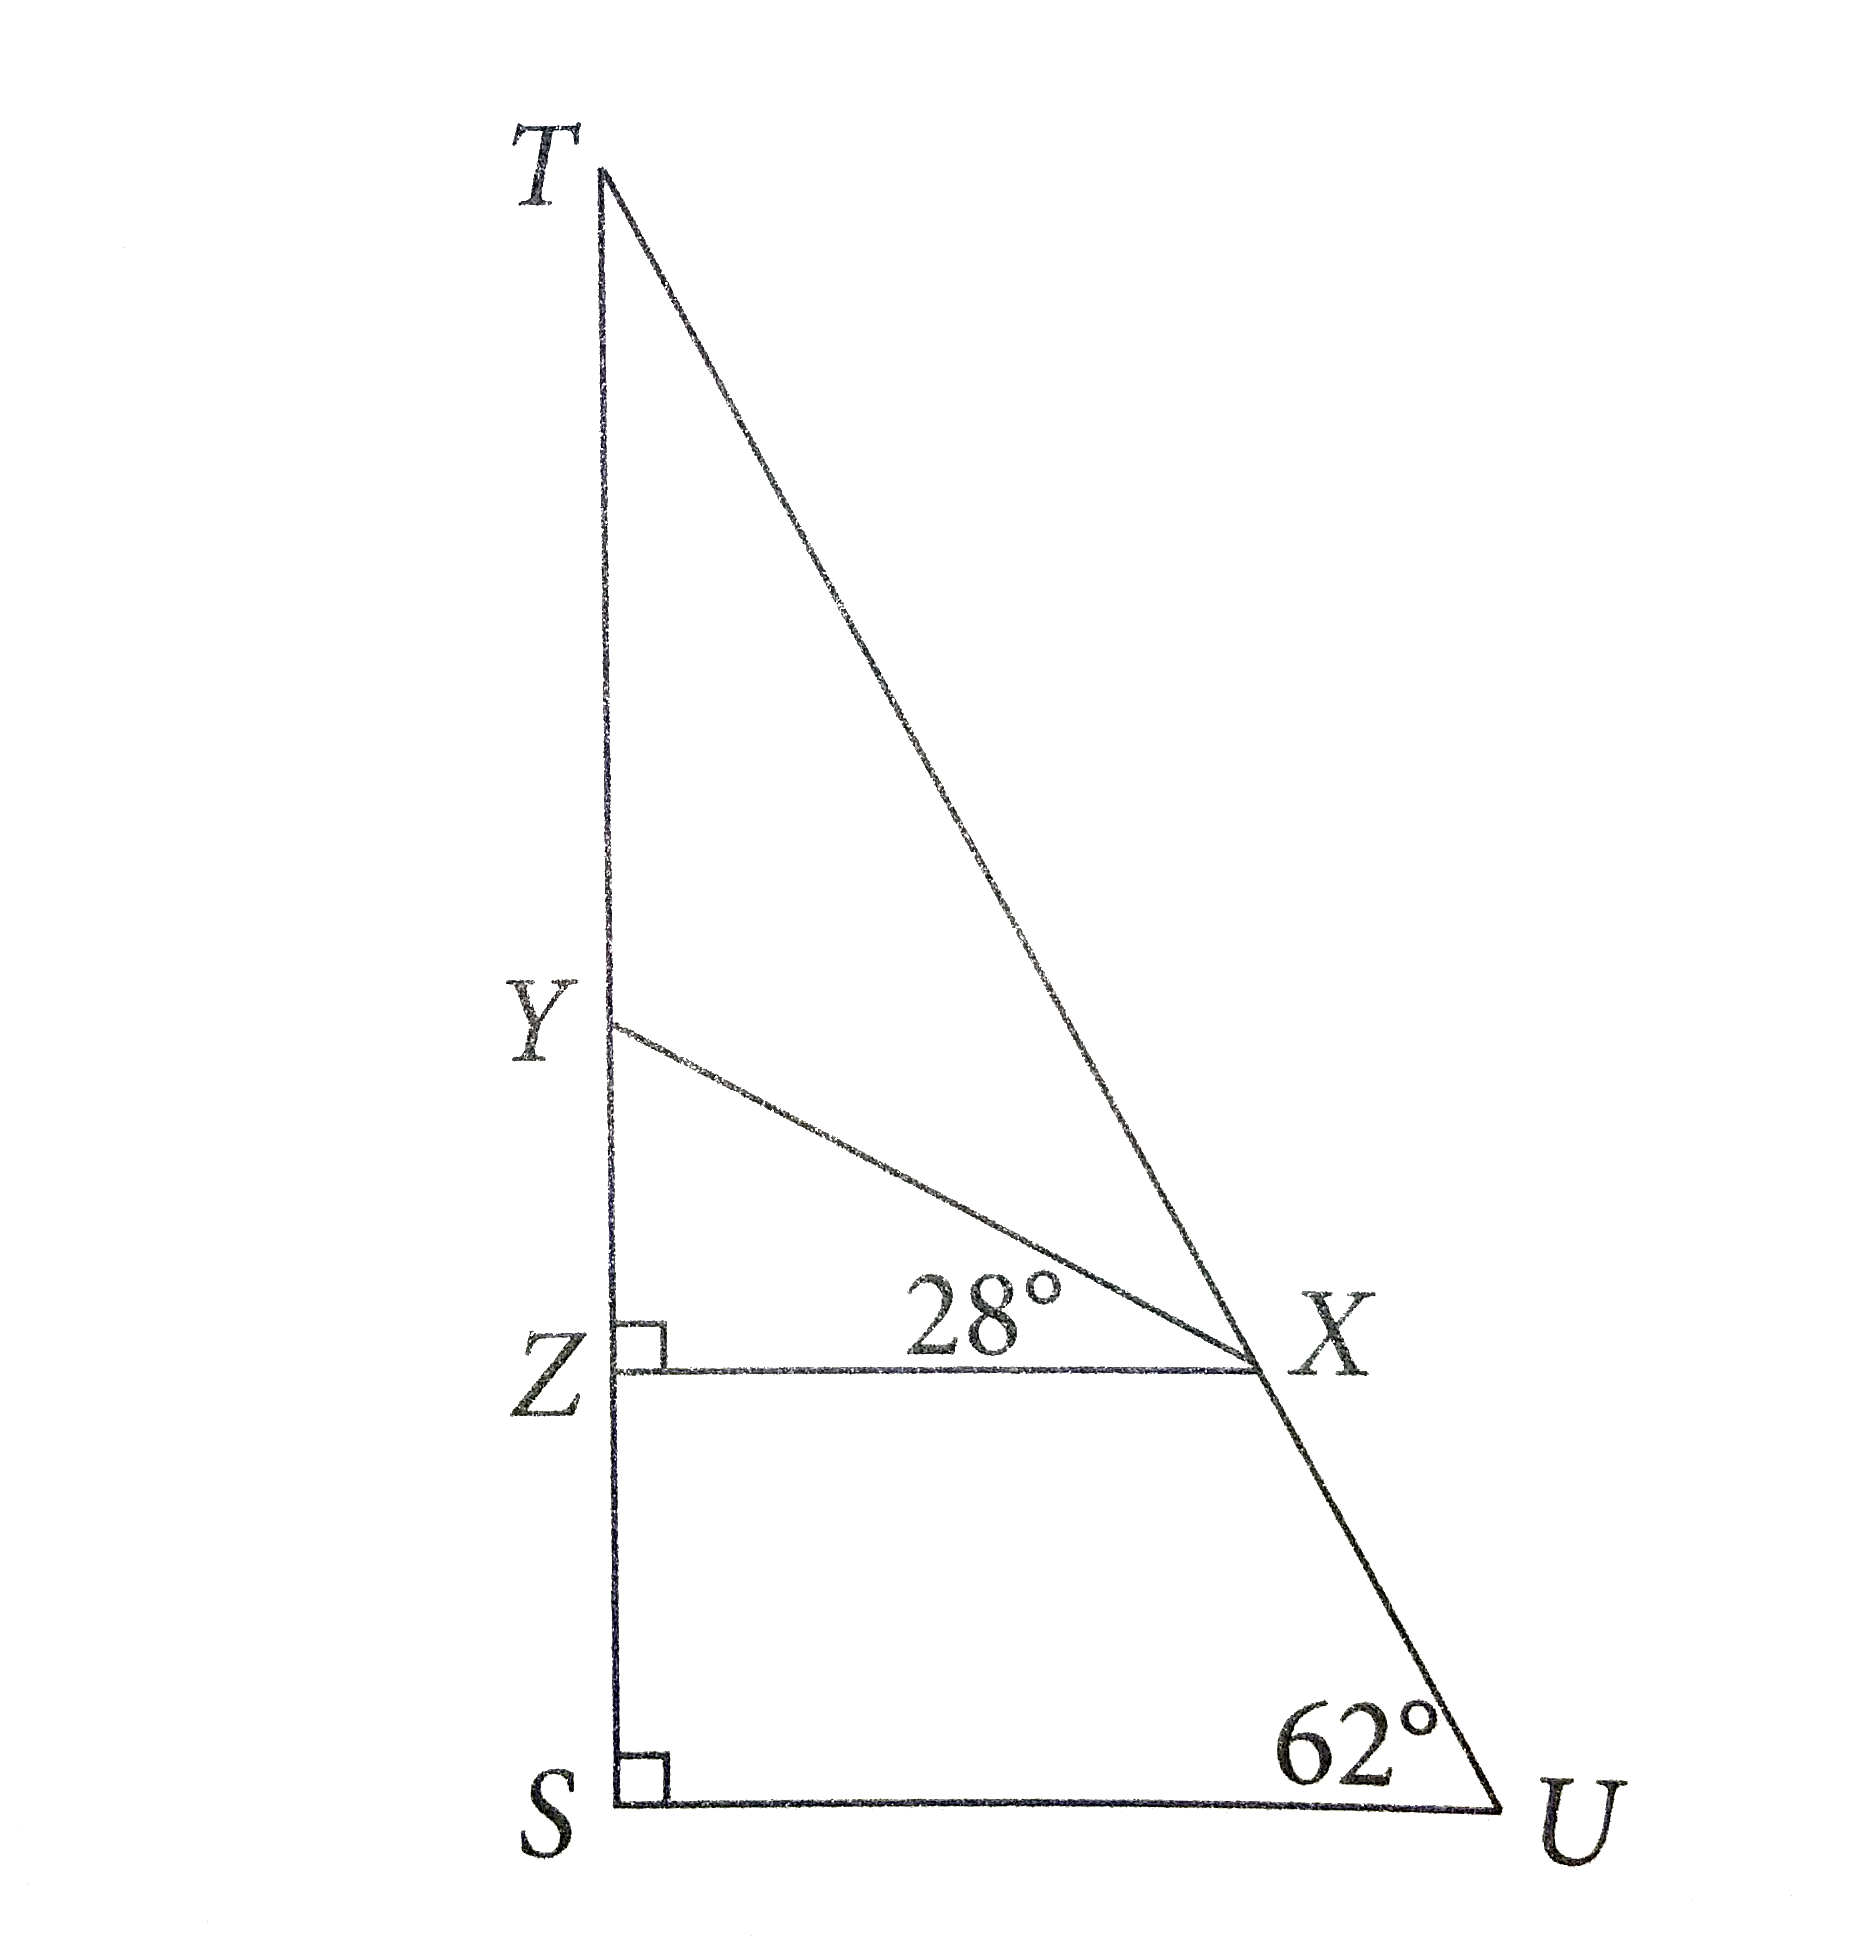 Triangles STU and XYZ are shown above. Which of the following is equal to ratio of (ST)/(SU)